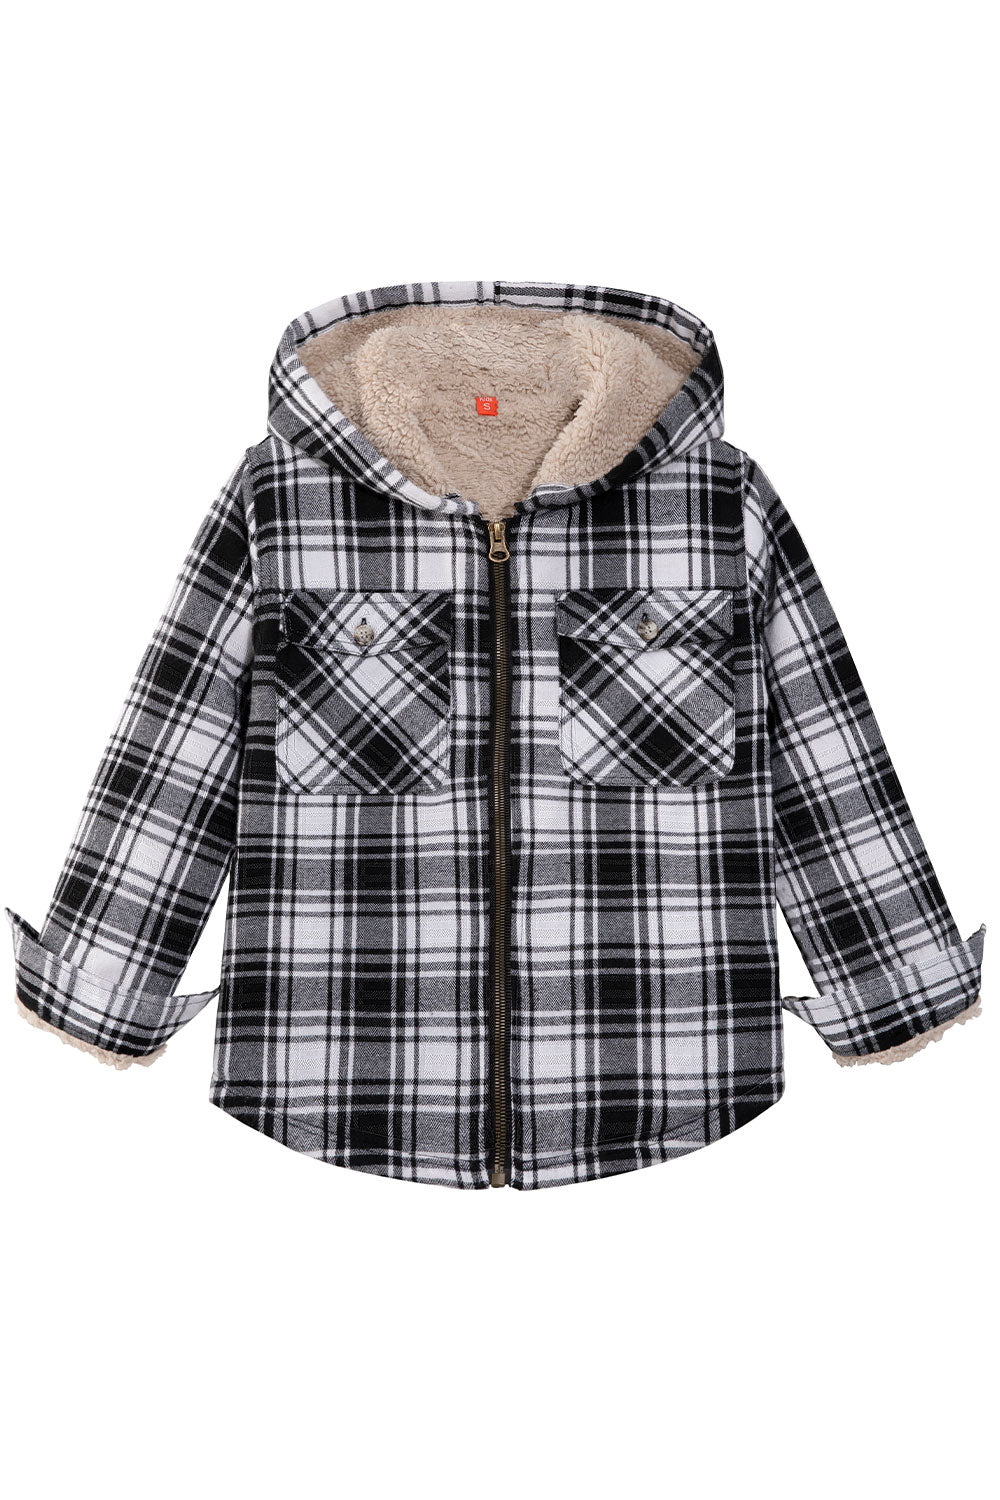 Boys Sherpa Lined Flannel Jacket,Full Zip Up Plaid